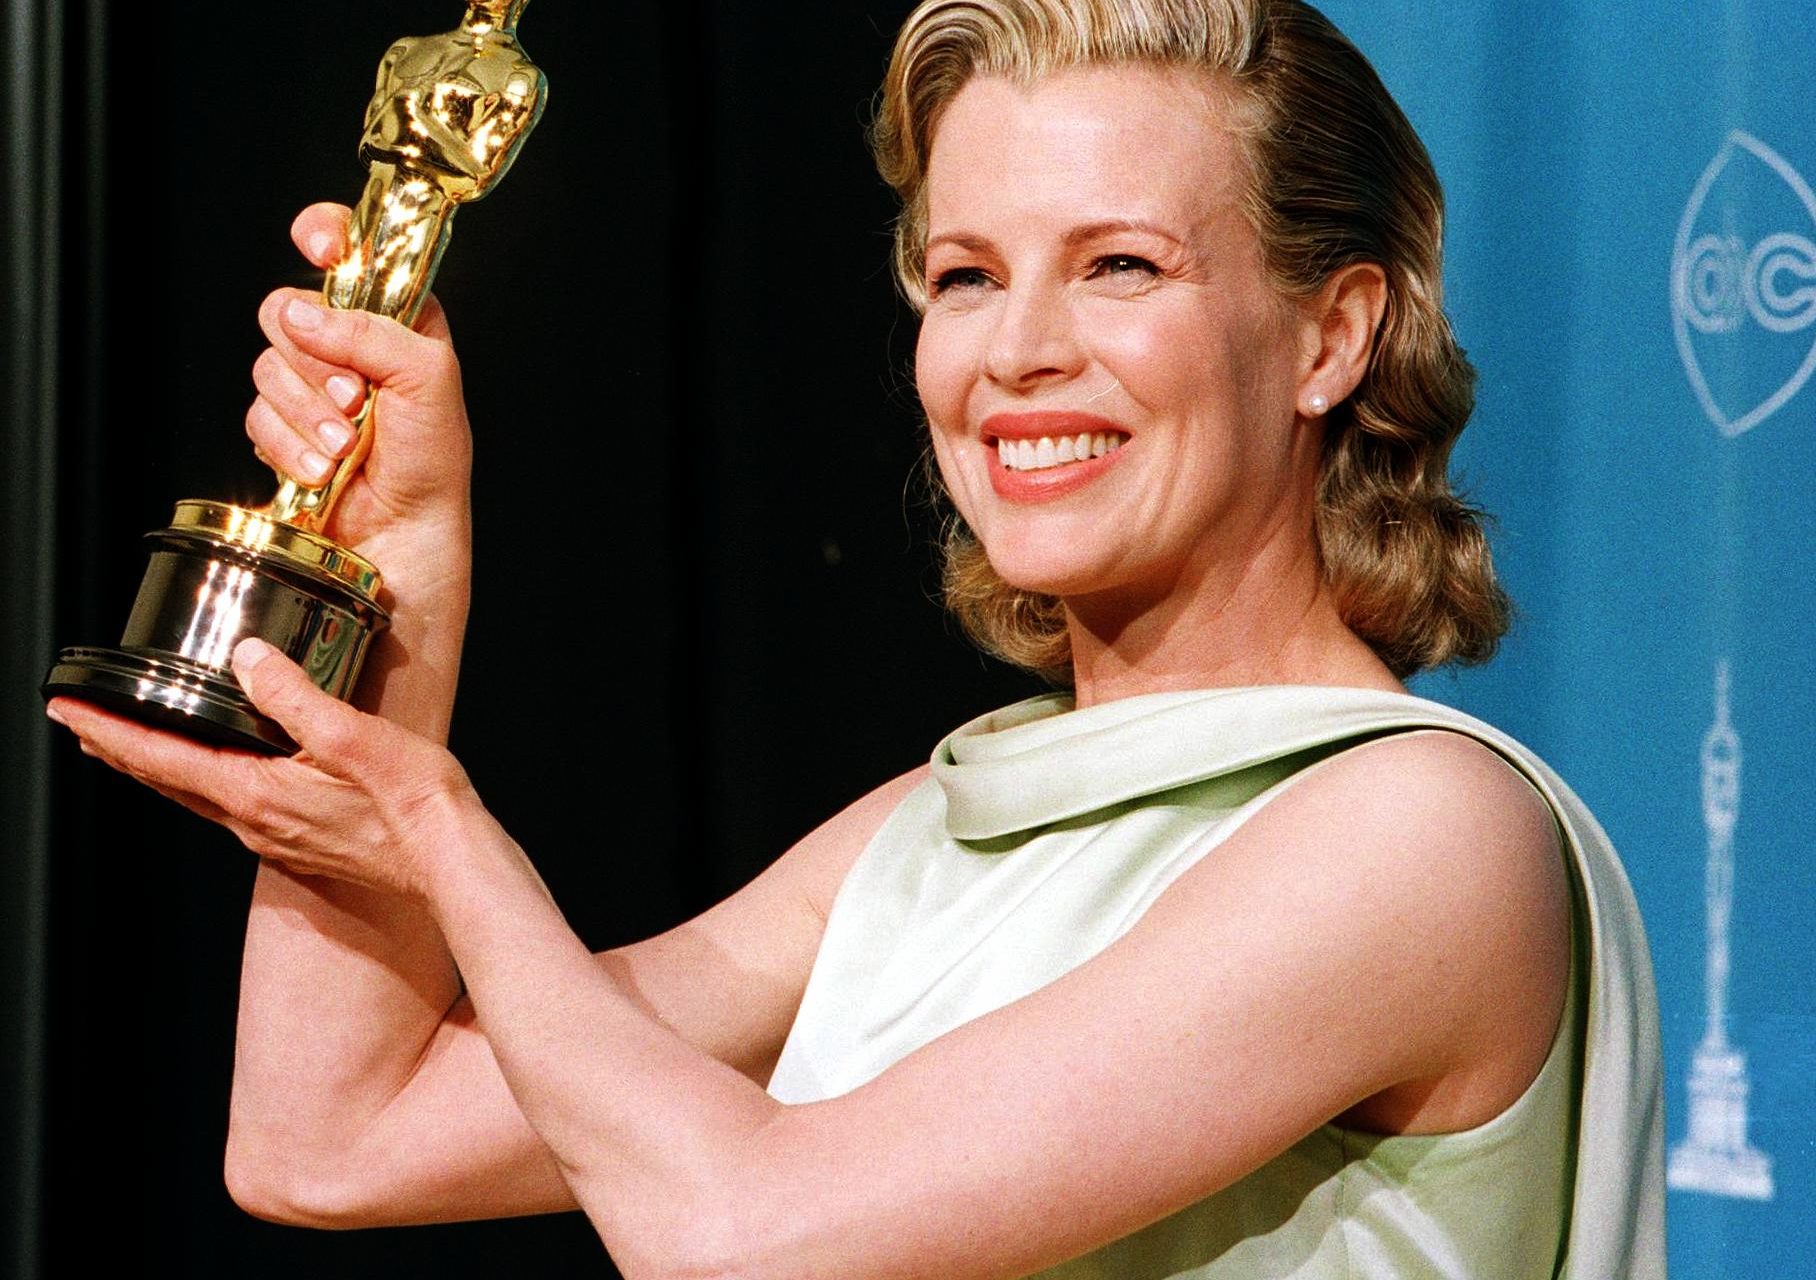 <p>After a series of lukewarm films, Kim made a big-time comeback as the high-class escort in the neo-noir picture ‘L.A. Confidential' (1997). She had initially turned the part down twice, as she was enjoying motherhood and feeling insecure. But in the end, it got her the Oscar for Best Supporting Actress.</p>